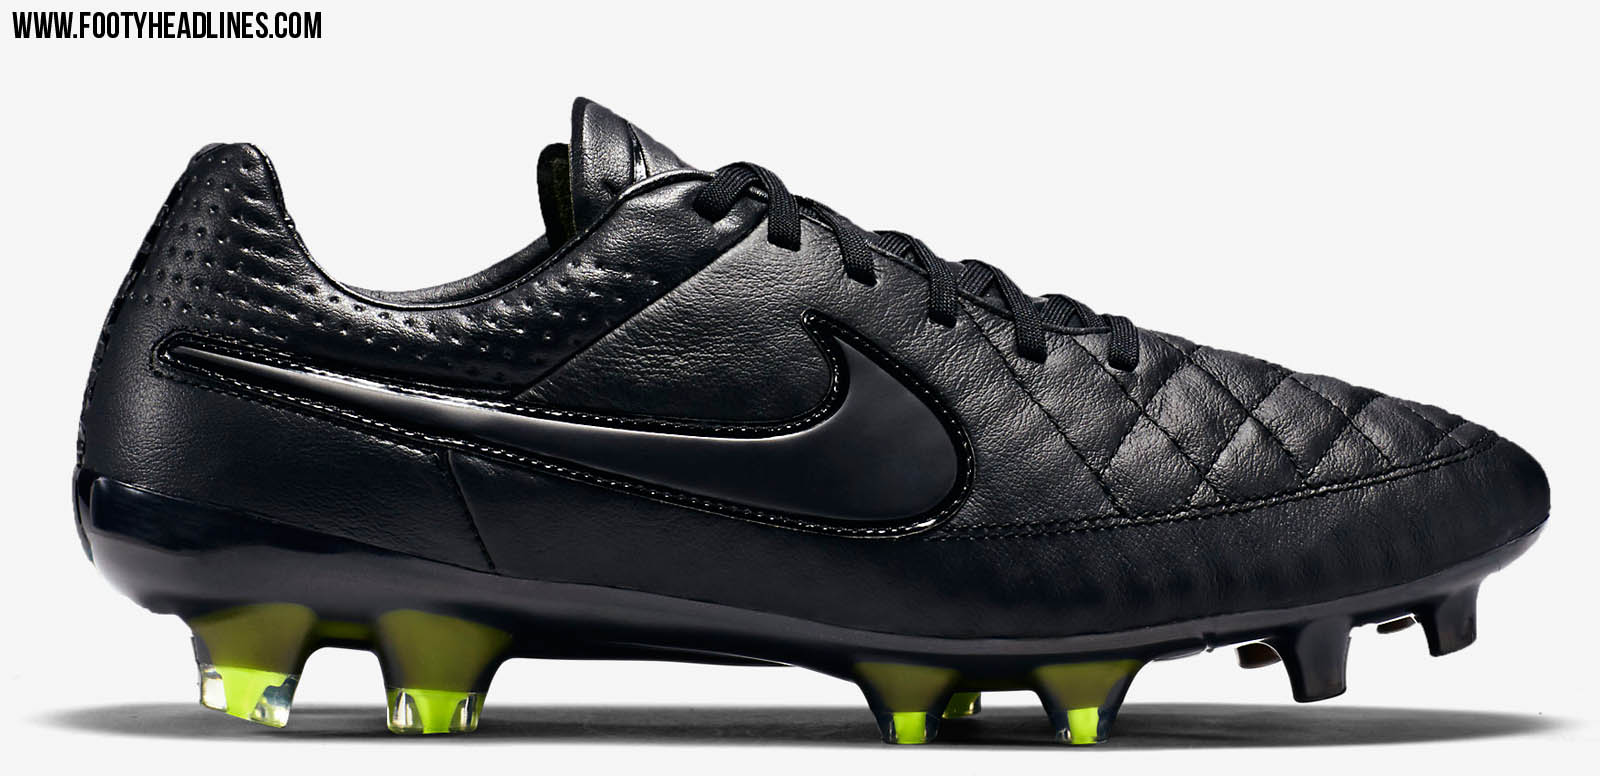 Blackout Nike V 2015 Boots Released - Footy Headlines